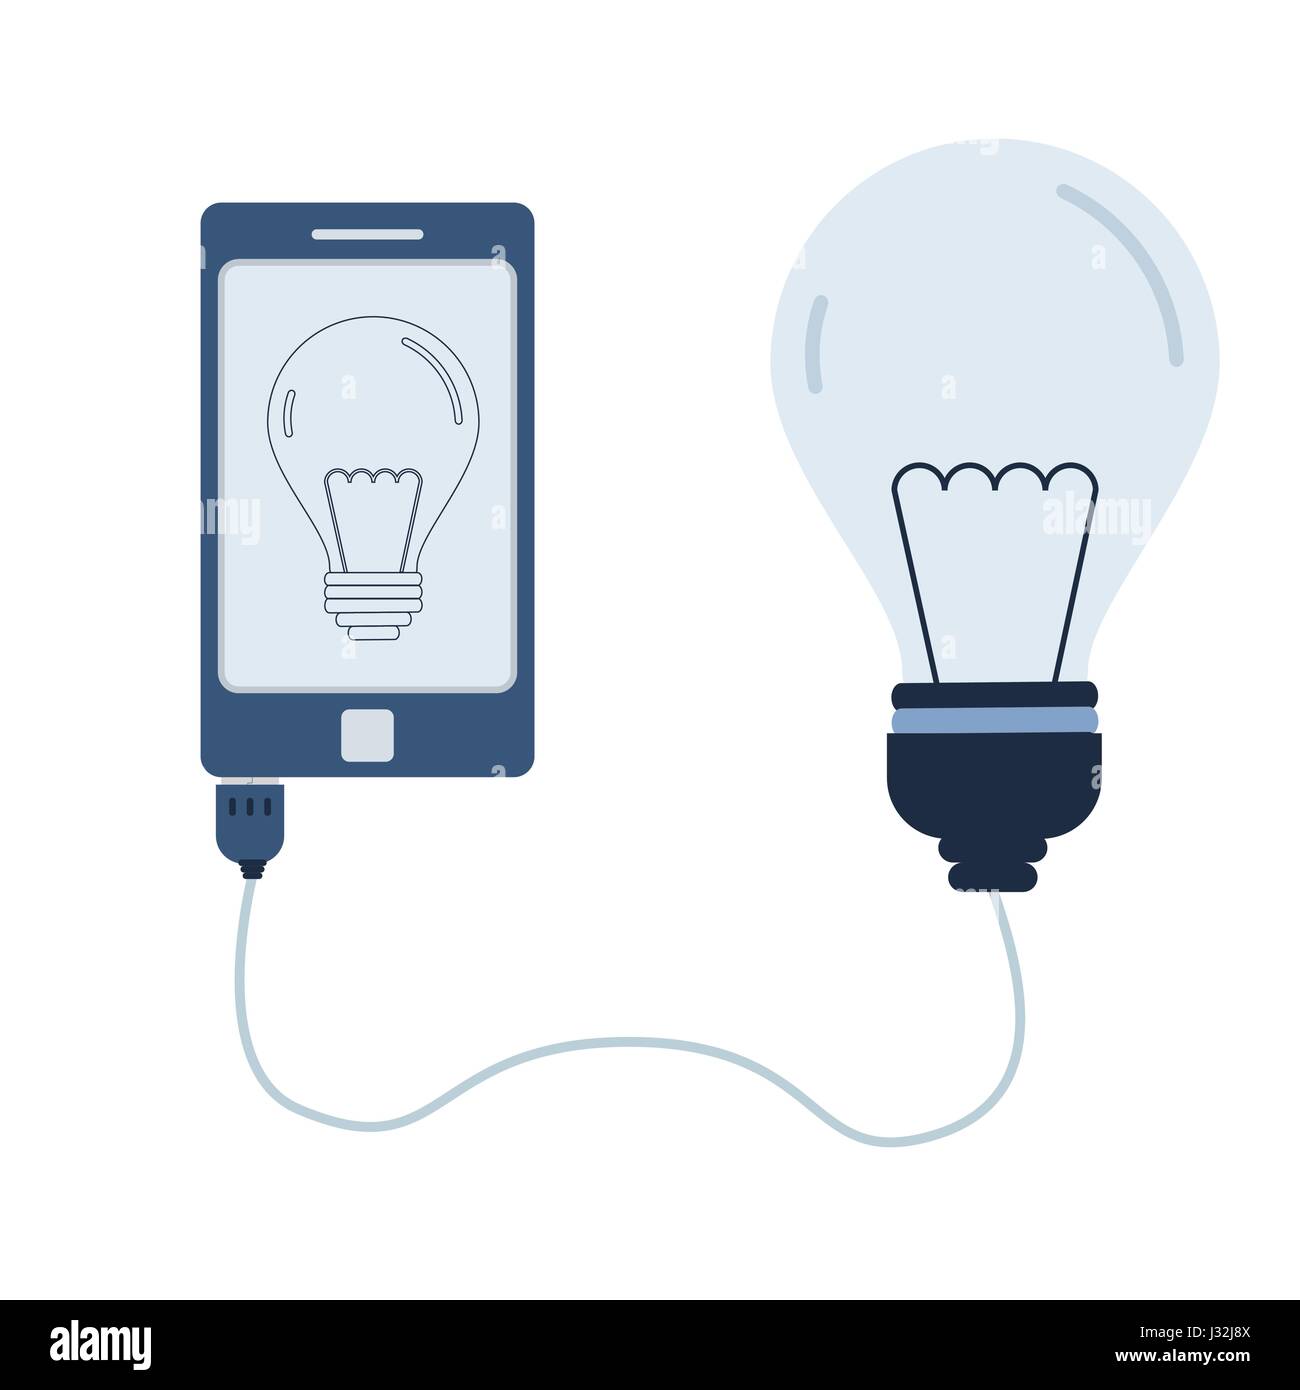 Light bulb connected to a cell phone through a usb cable. Outline of the lamp bulb being shown on the mobile monitor. Flat design. Isolated. Stock Vector